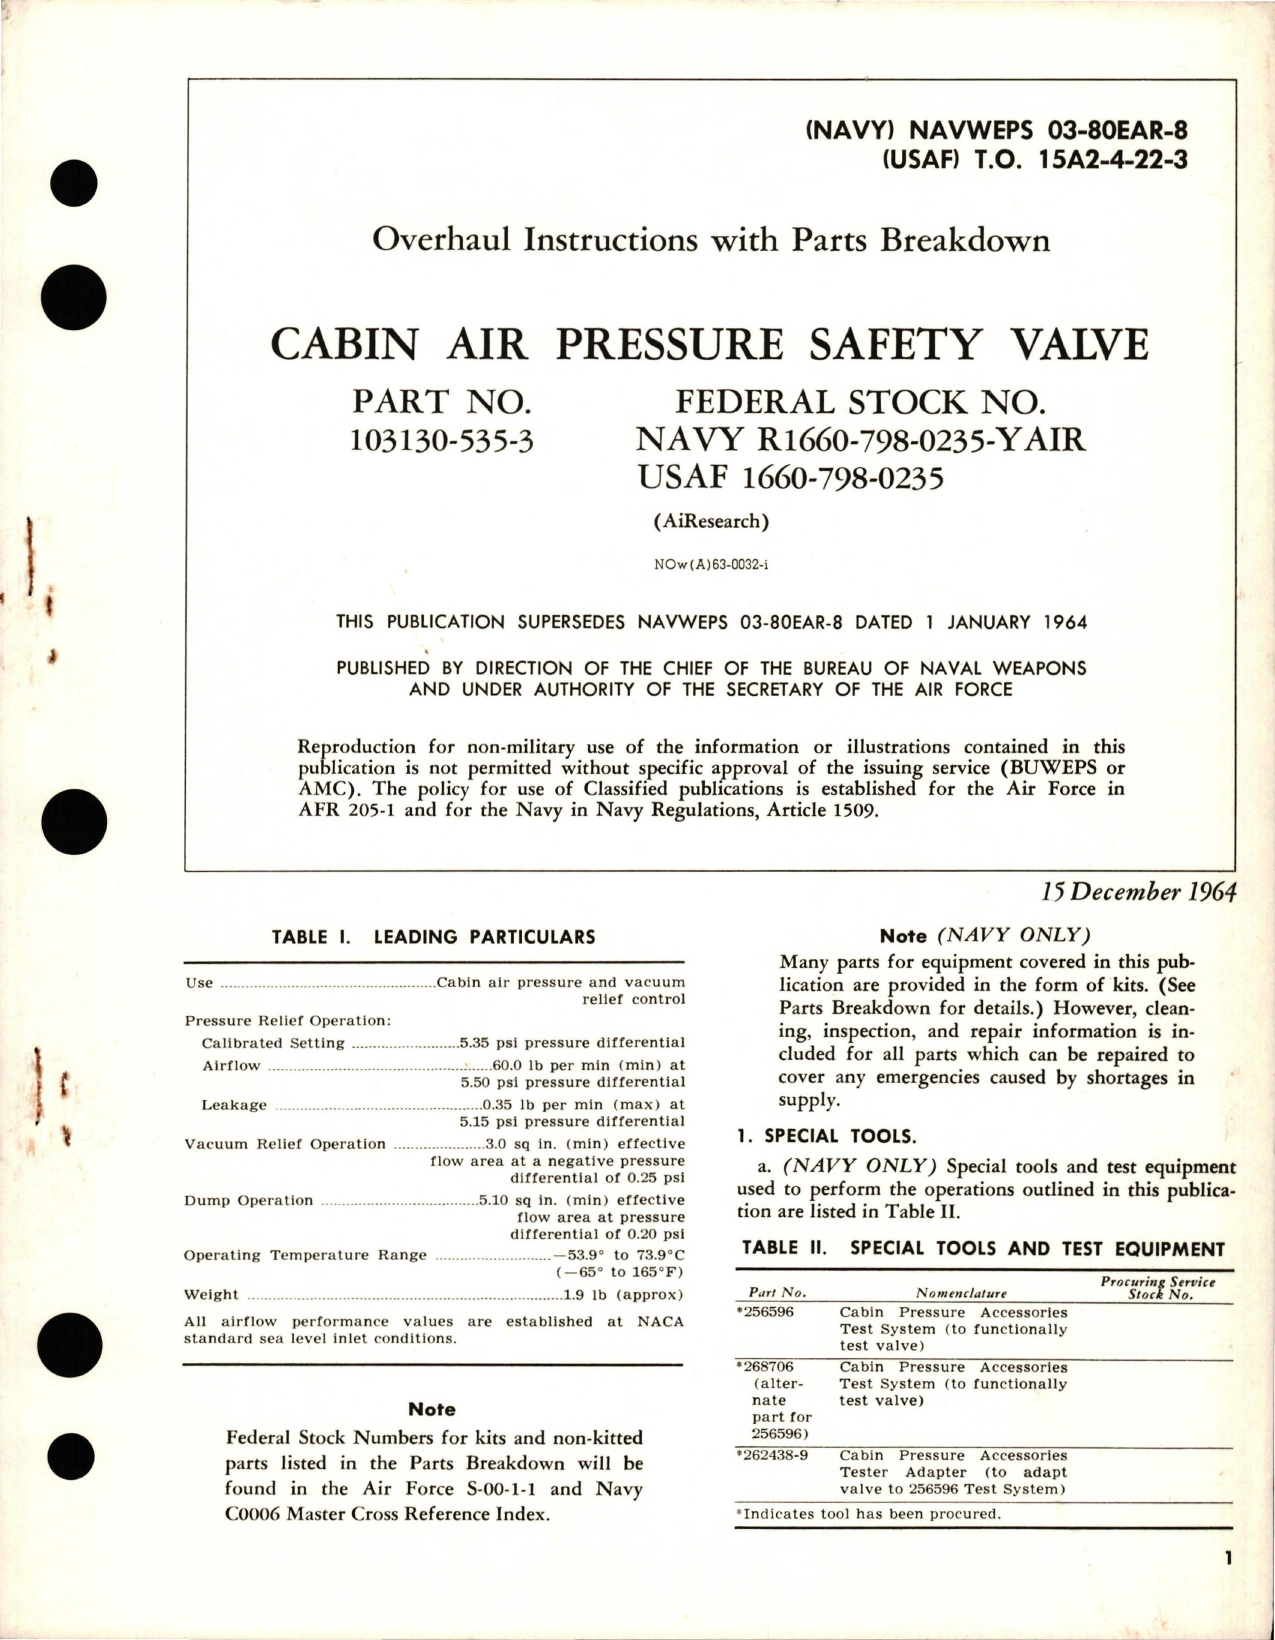 Sample page 1 from AirCorps Library document: Overhaul Instructions with Parts Breakdown for Cabin Air Pressure Safety Valve - Part 103130-535-3